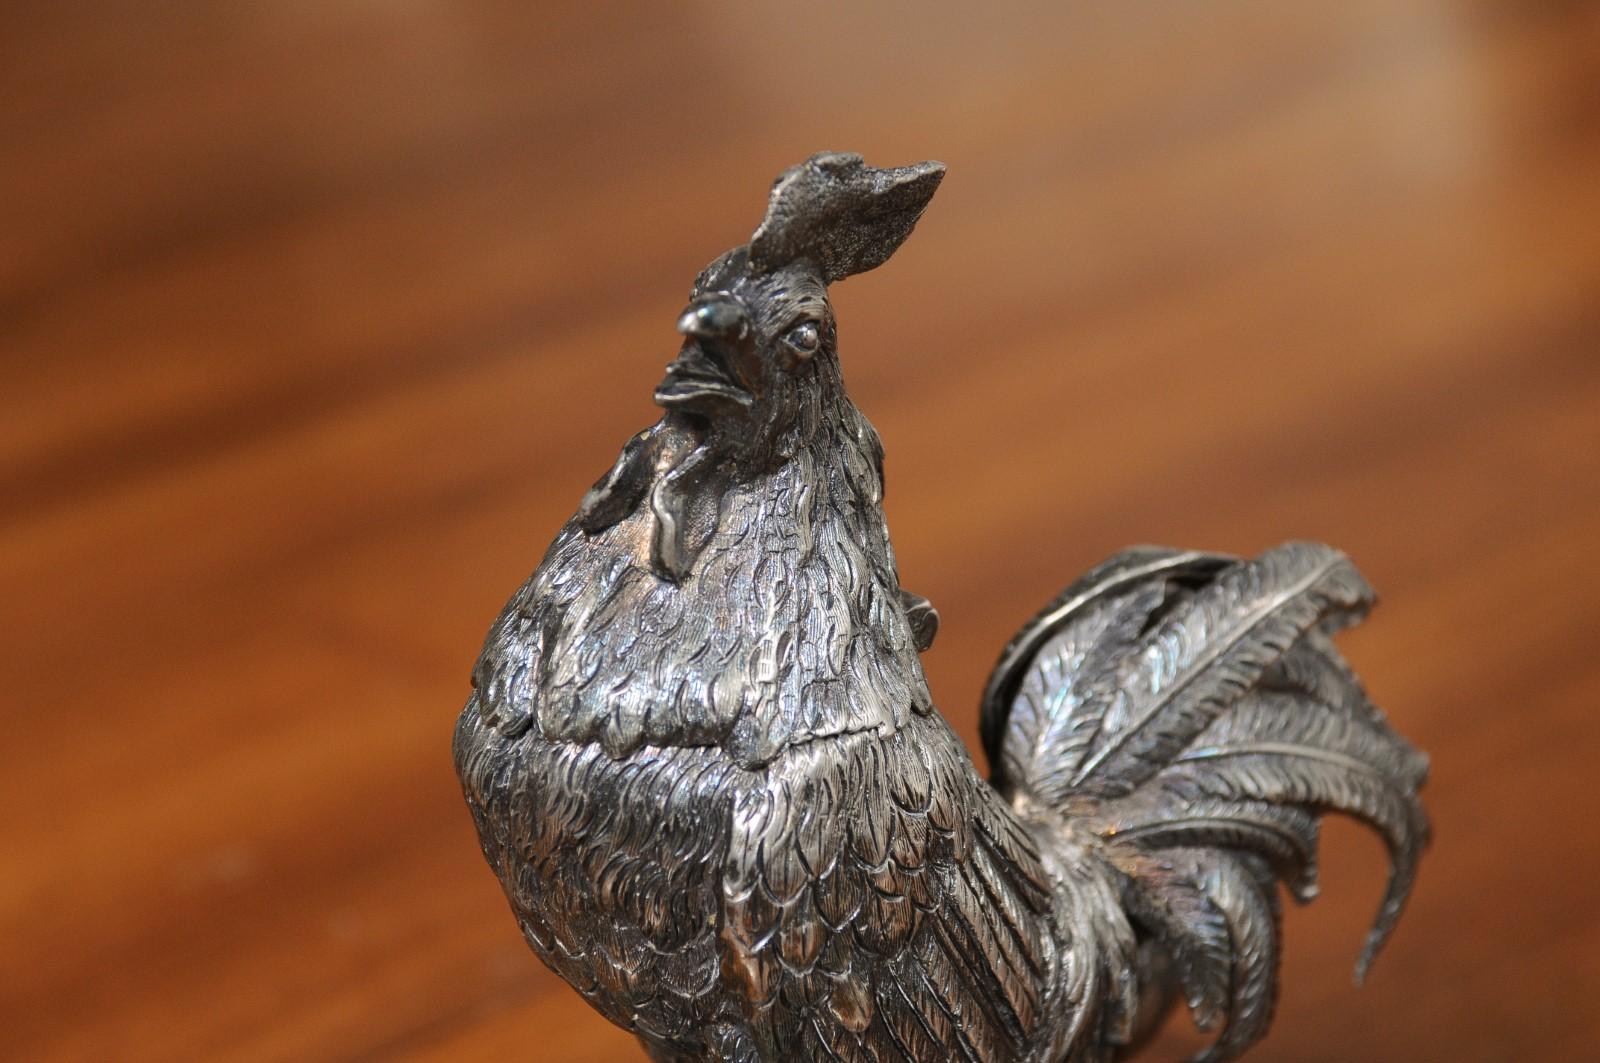 English Victorian 19th Century Silver Inkwell Depicting a Crowing Rooster 1